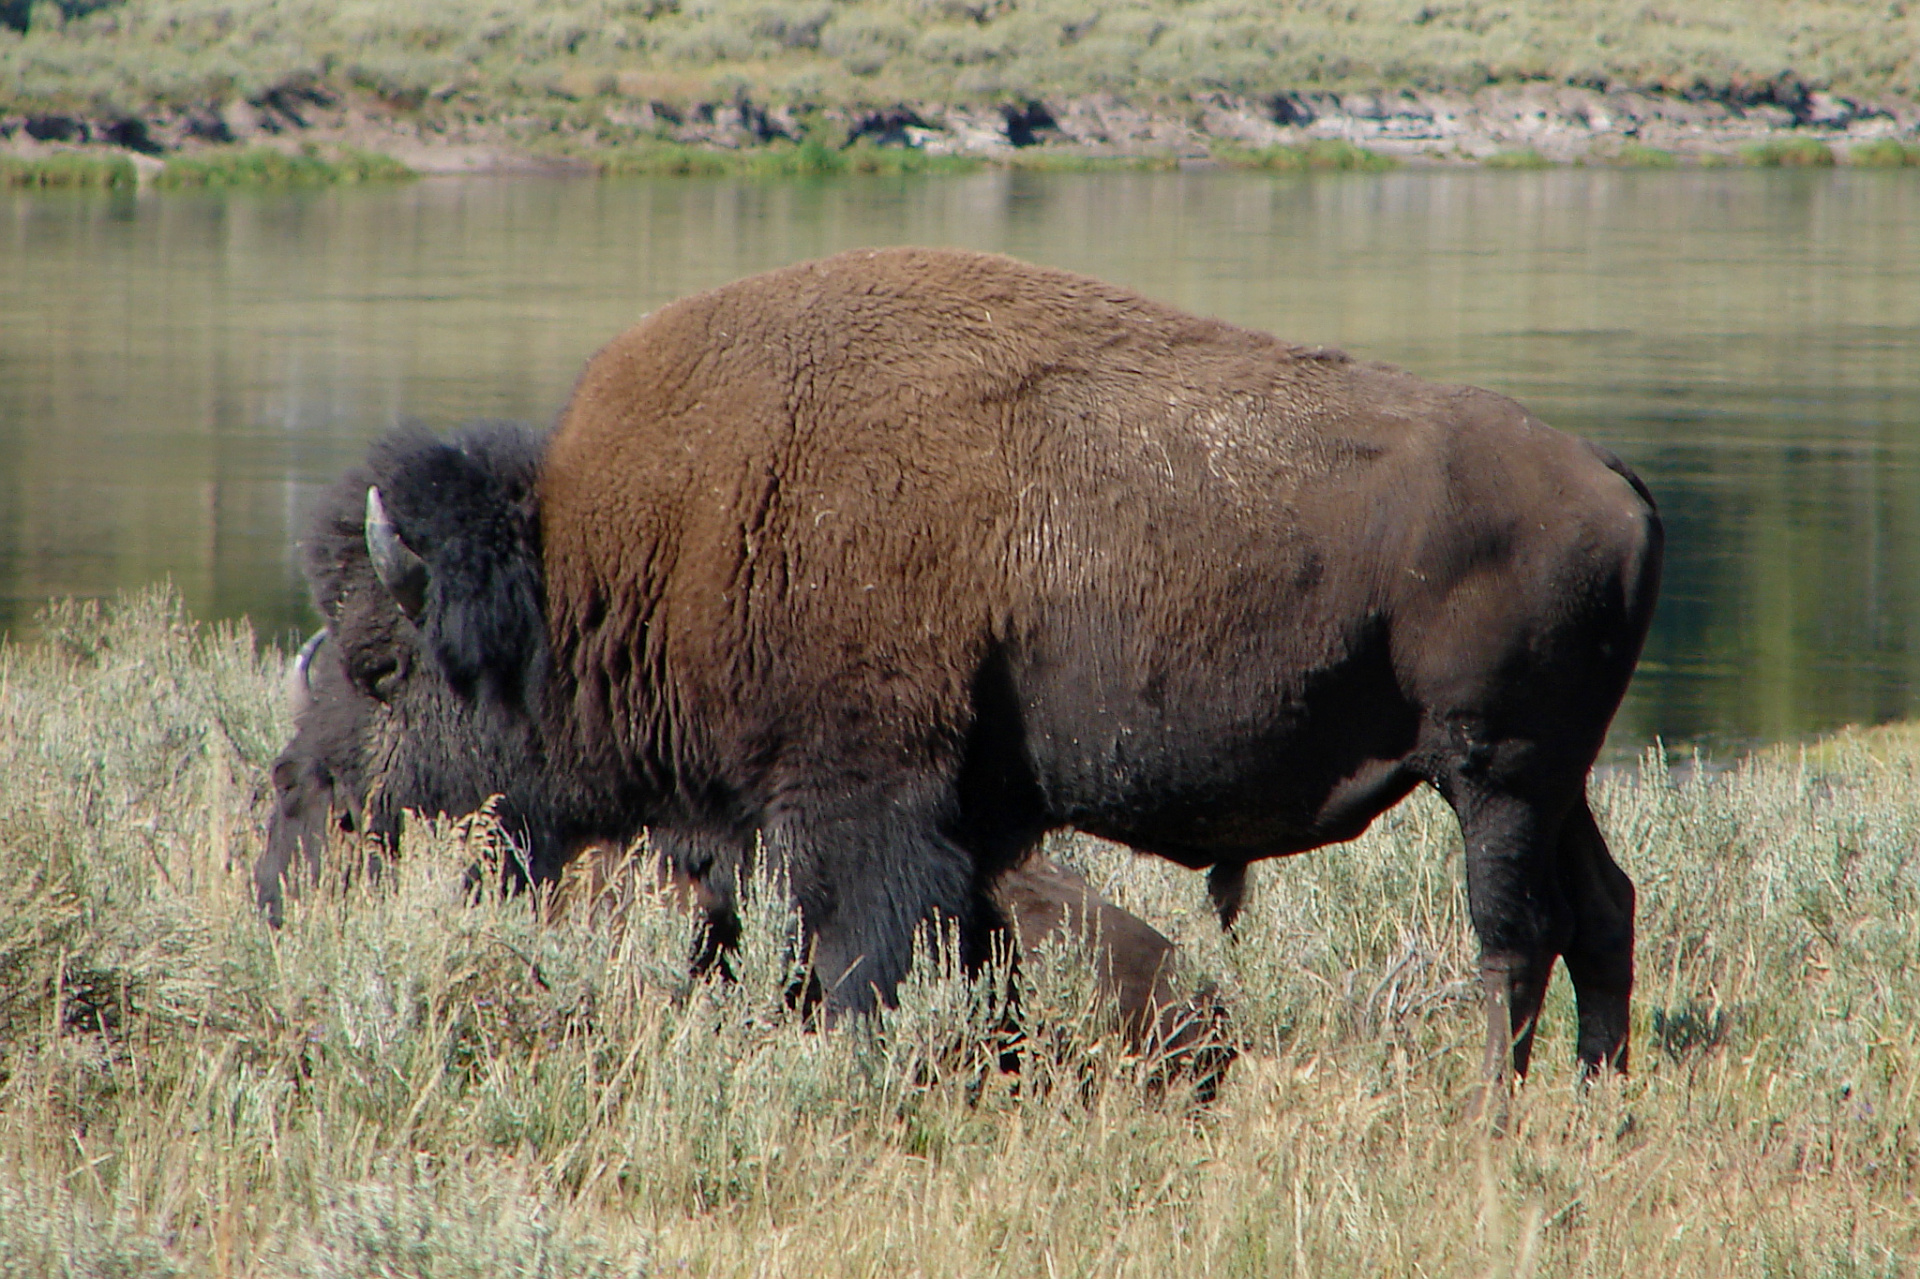 First Herd (Travels » US Trip 1: Cheyenne Country » The Journey » Yellowstone National Park » Buffalos)